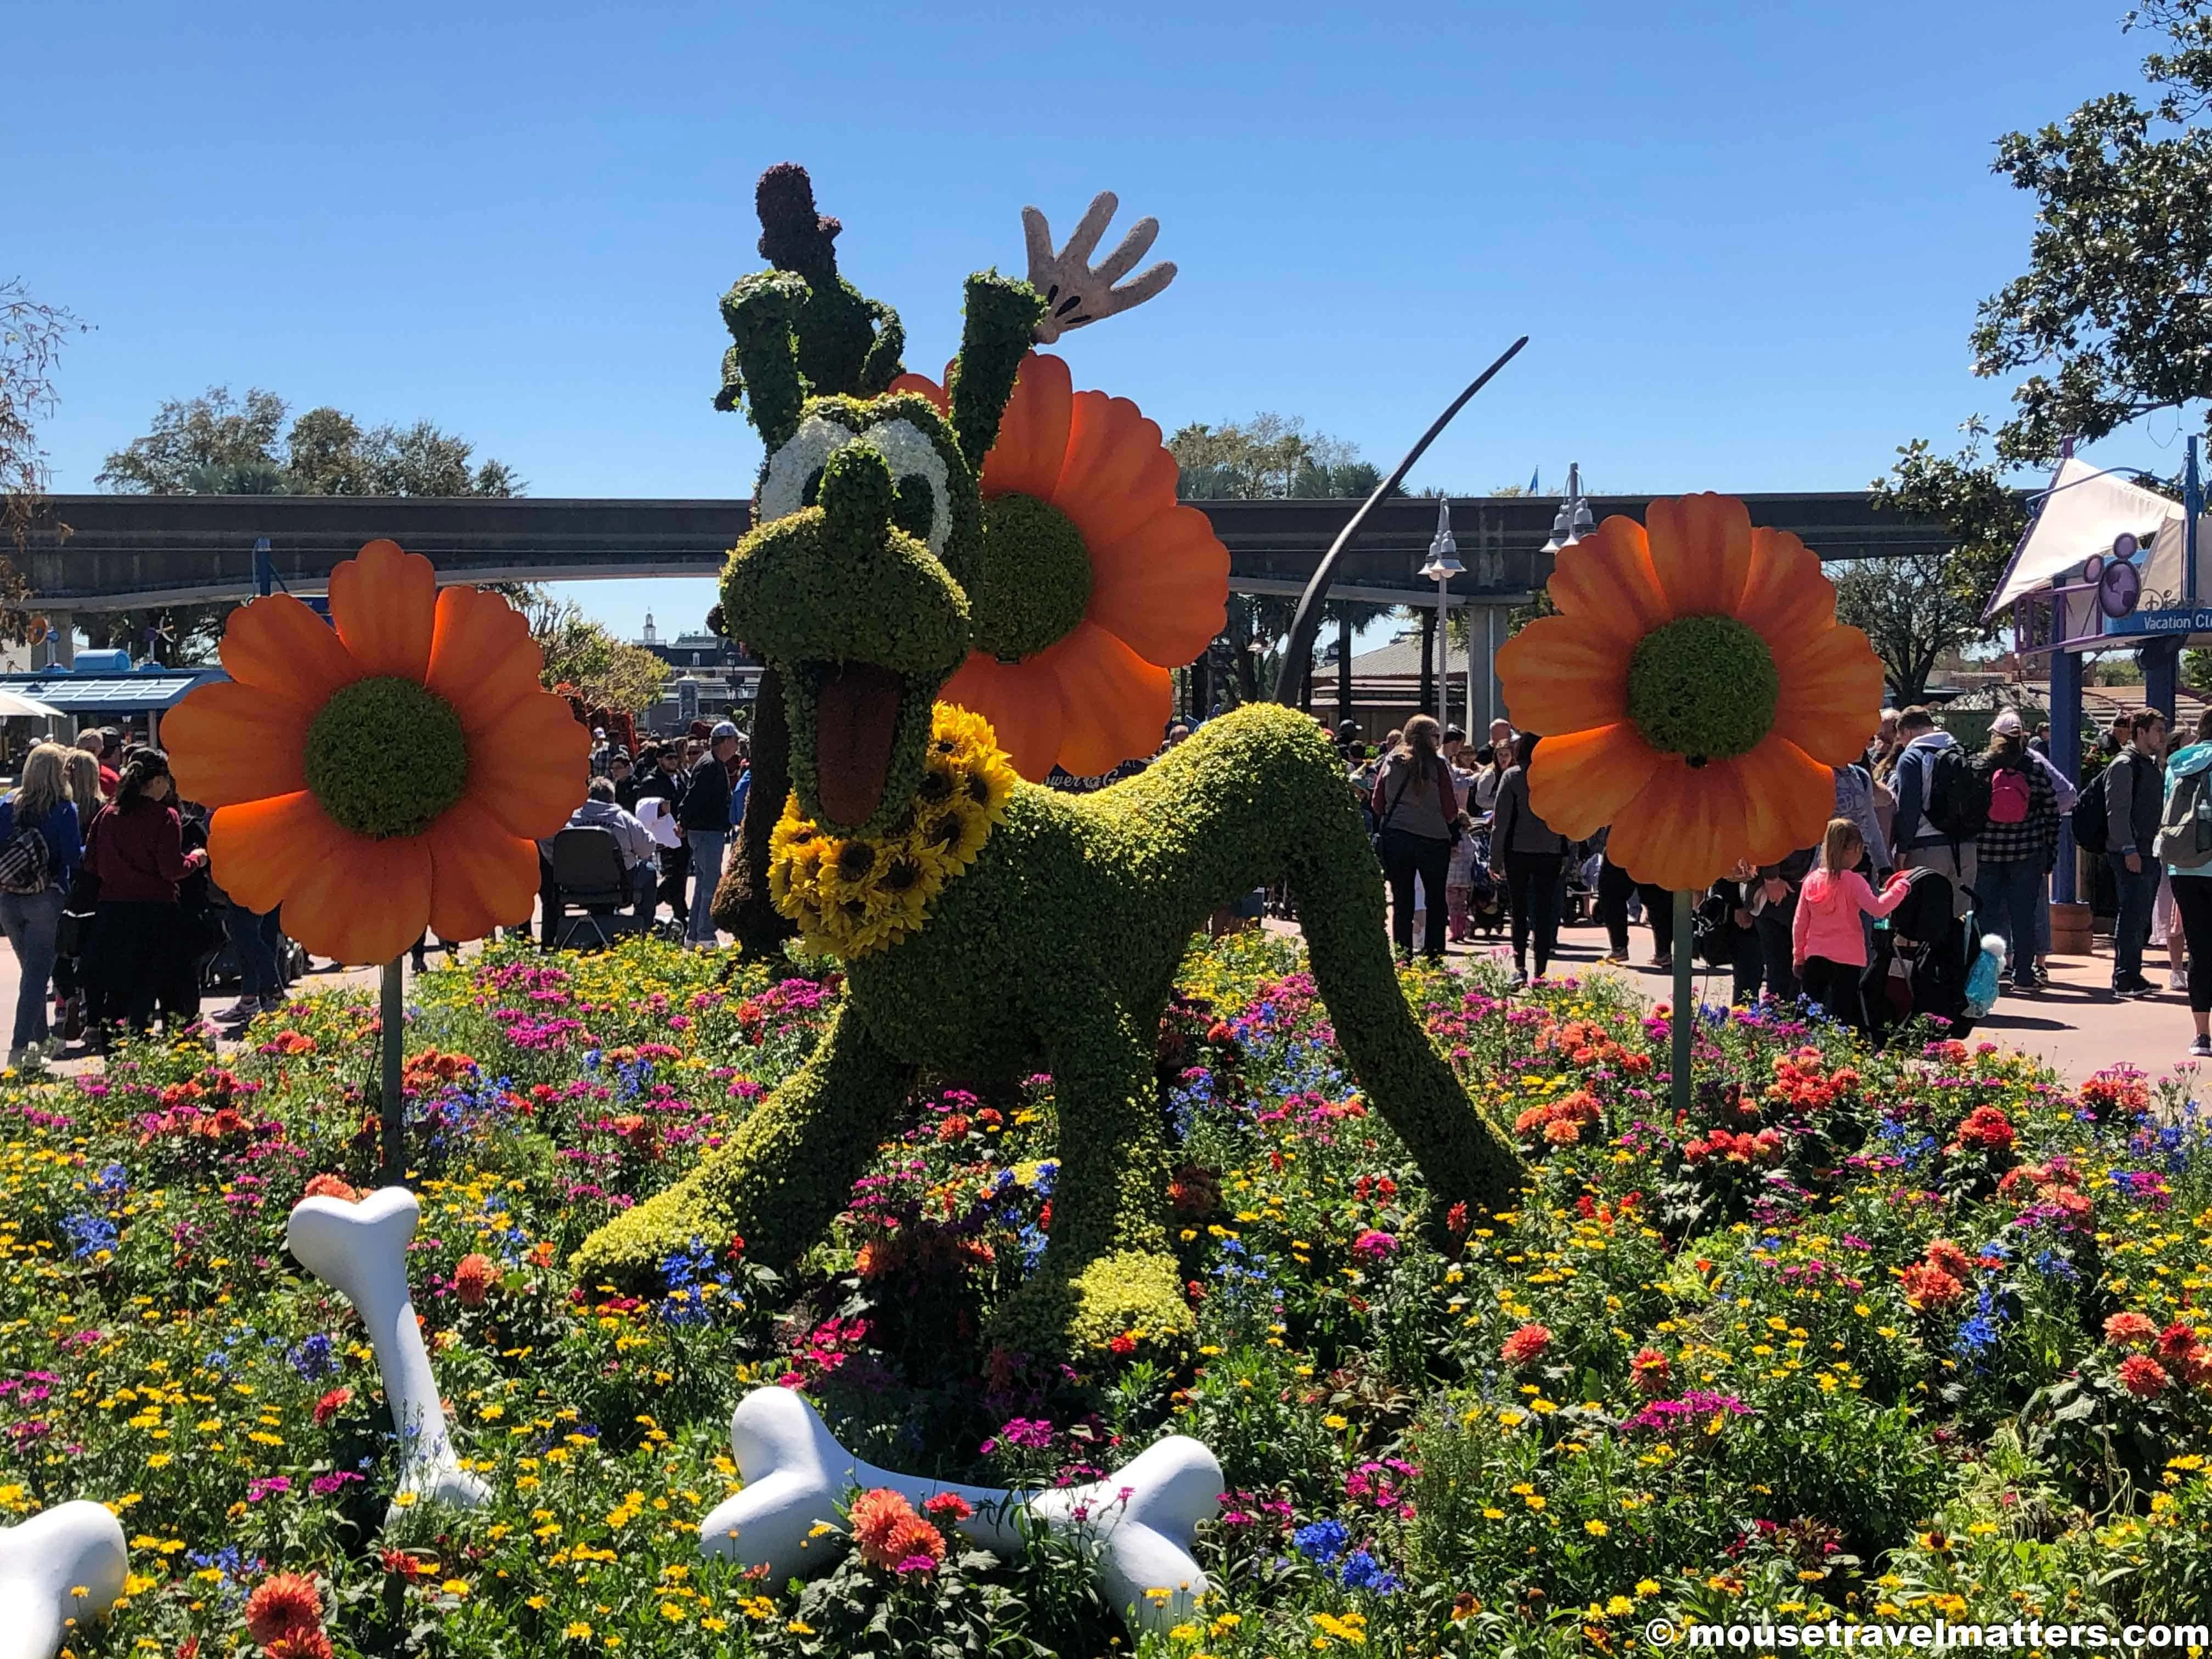 The 2020 Epcot International Flower & Garden Festival runs from March 04 - June 01, 2020, at Walt Disney World. This guide covers our tips & tricks for experiencing everything Epcot's Flower and Garden Festival has to offer. #wdw #epcotfestival #epcotflowerandgarden #2020epcotflowerandgardenfestival
